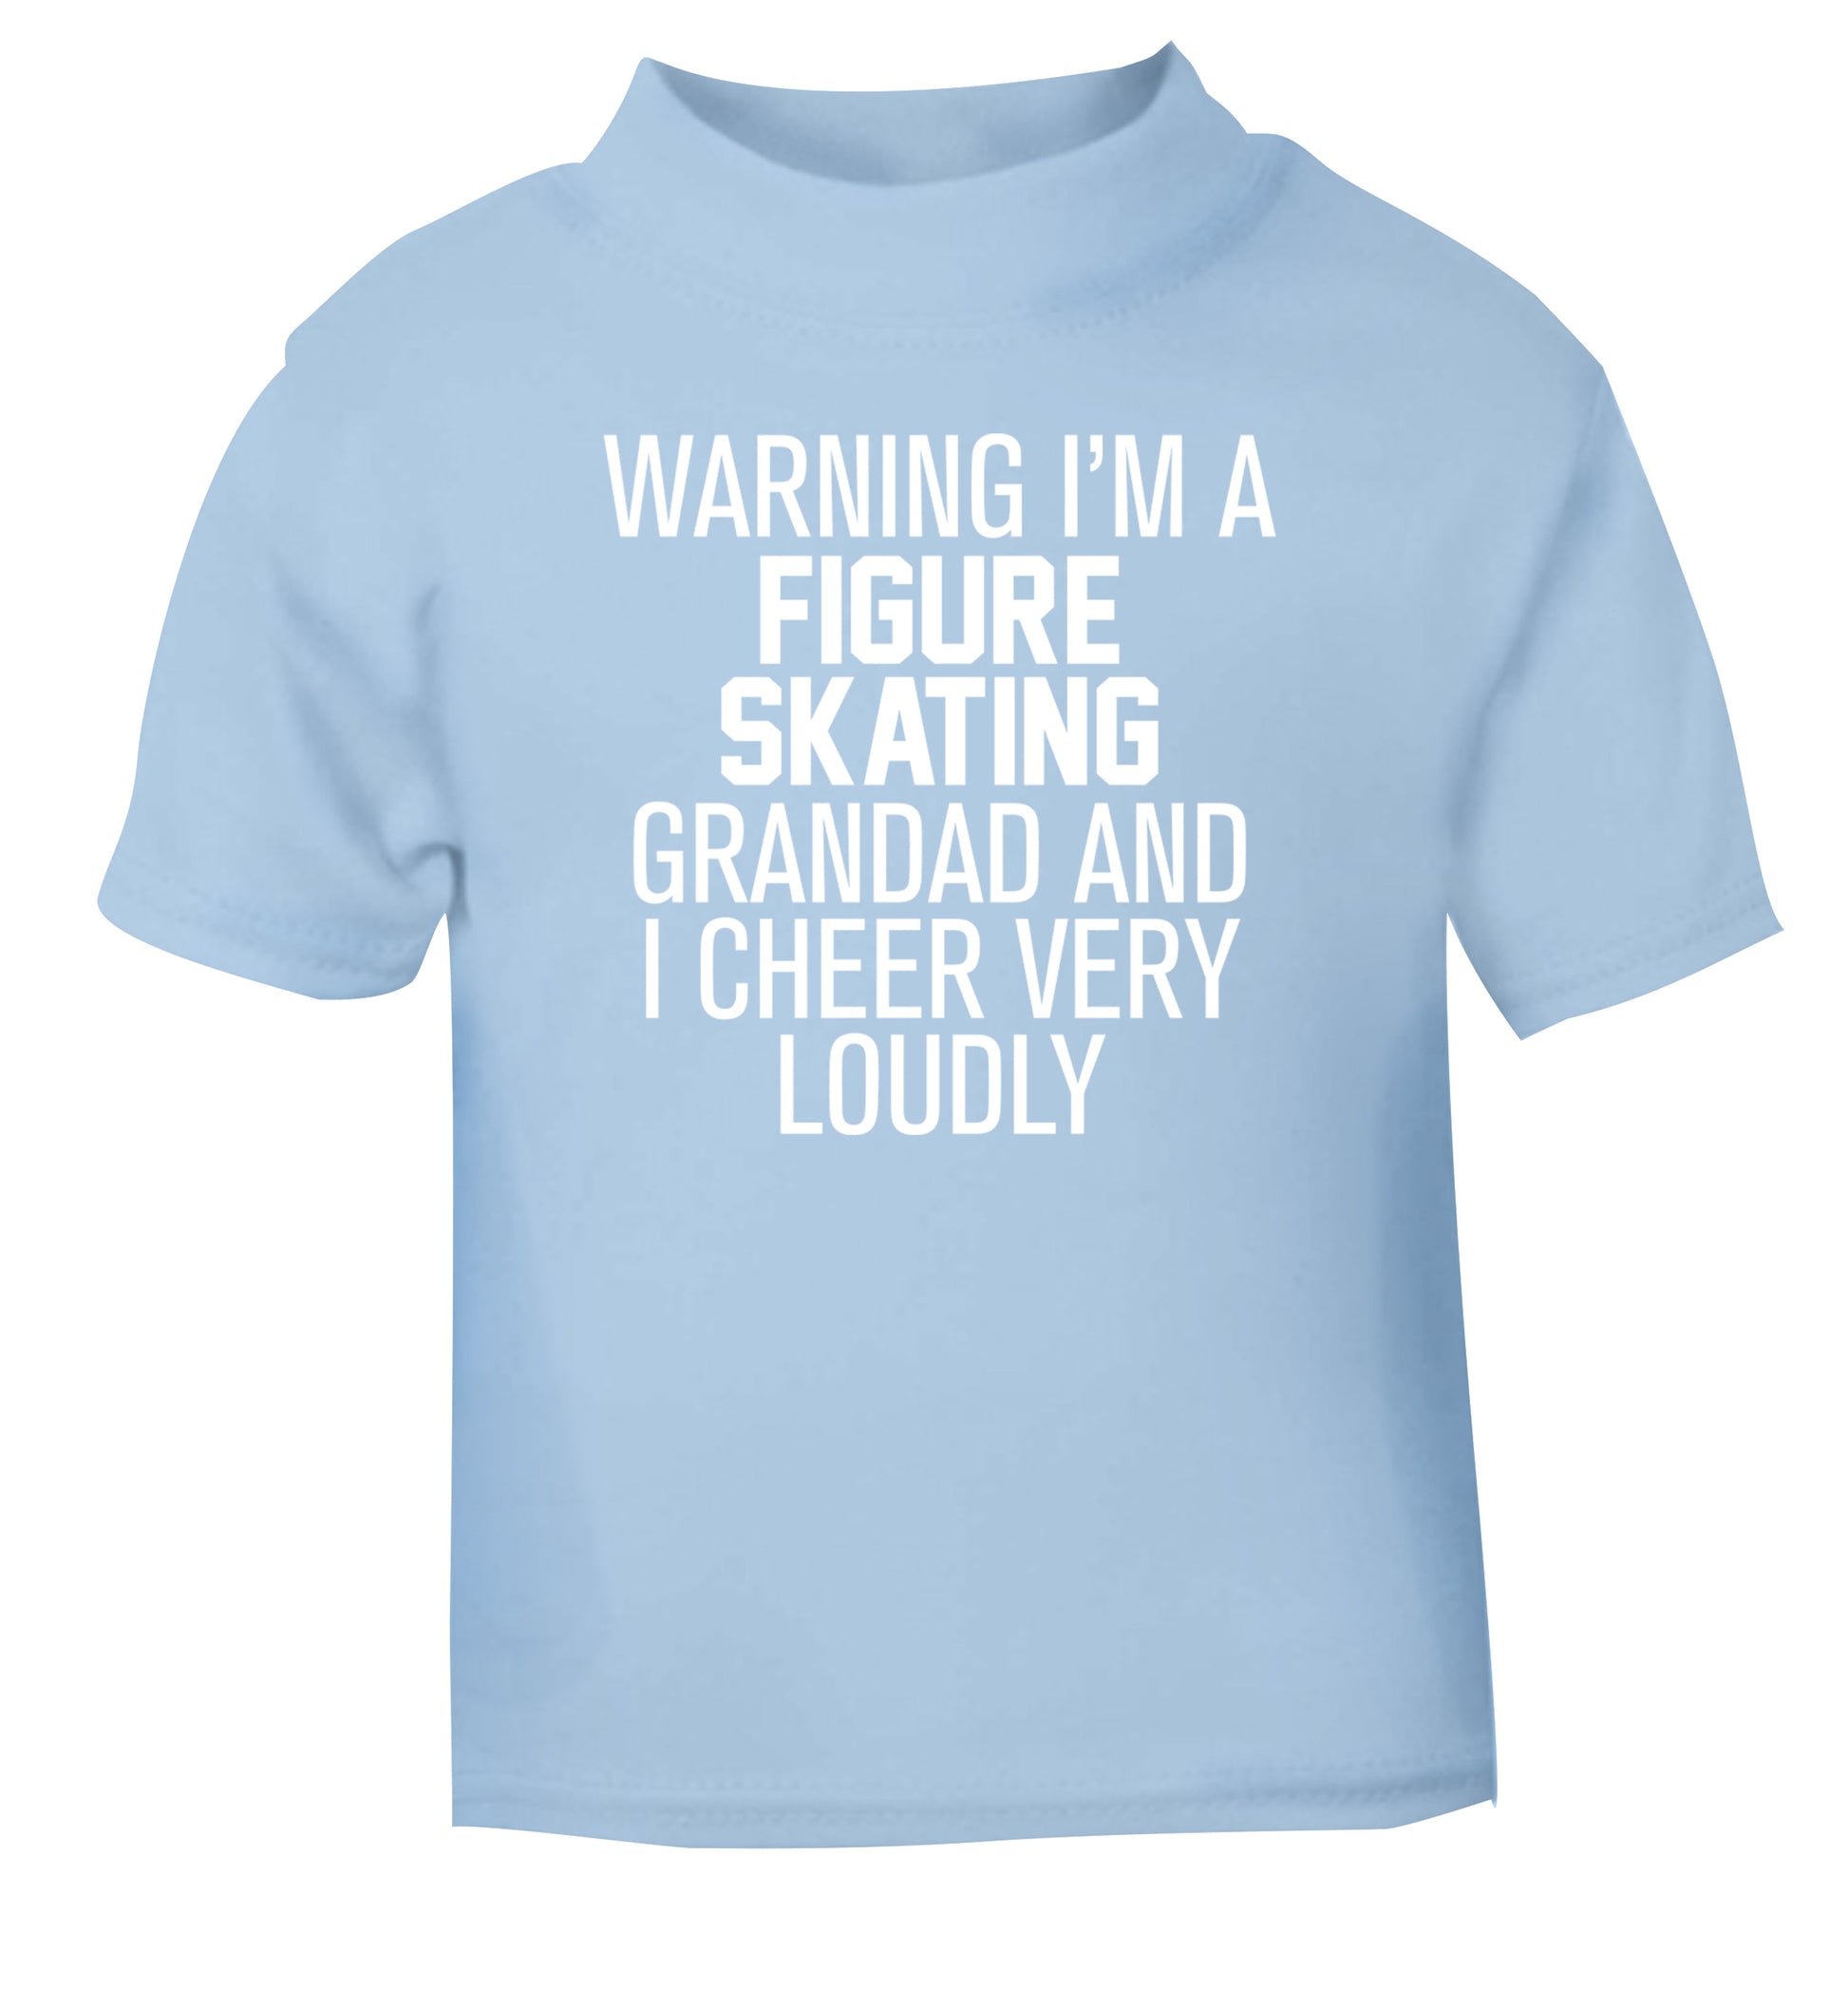 Warning I'm a figure skating grandad and I cheer very loudly light blue Baby Toddler Tshirt 2 Years